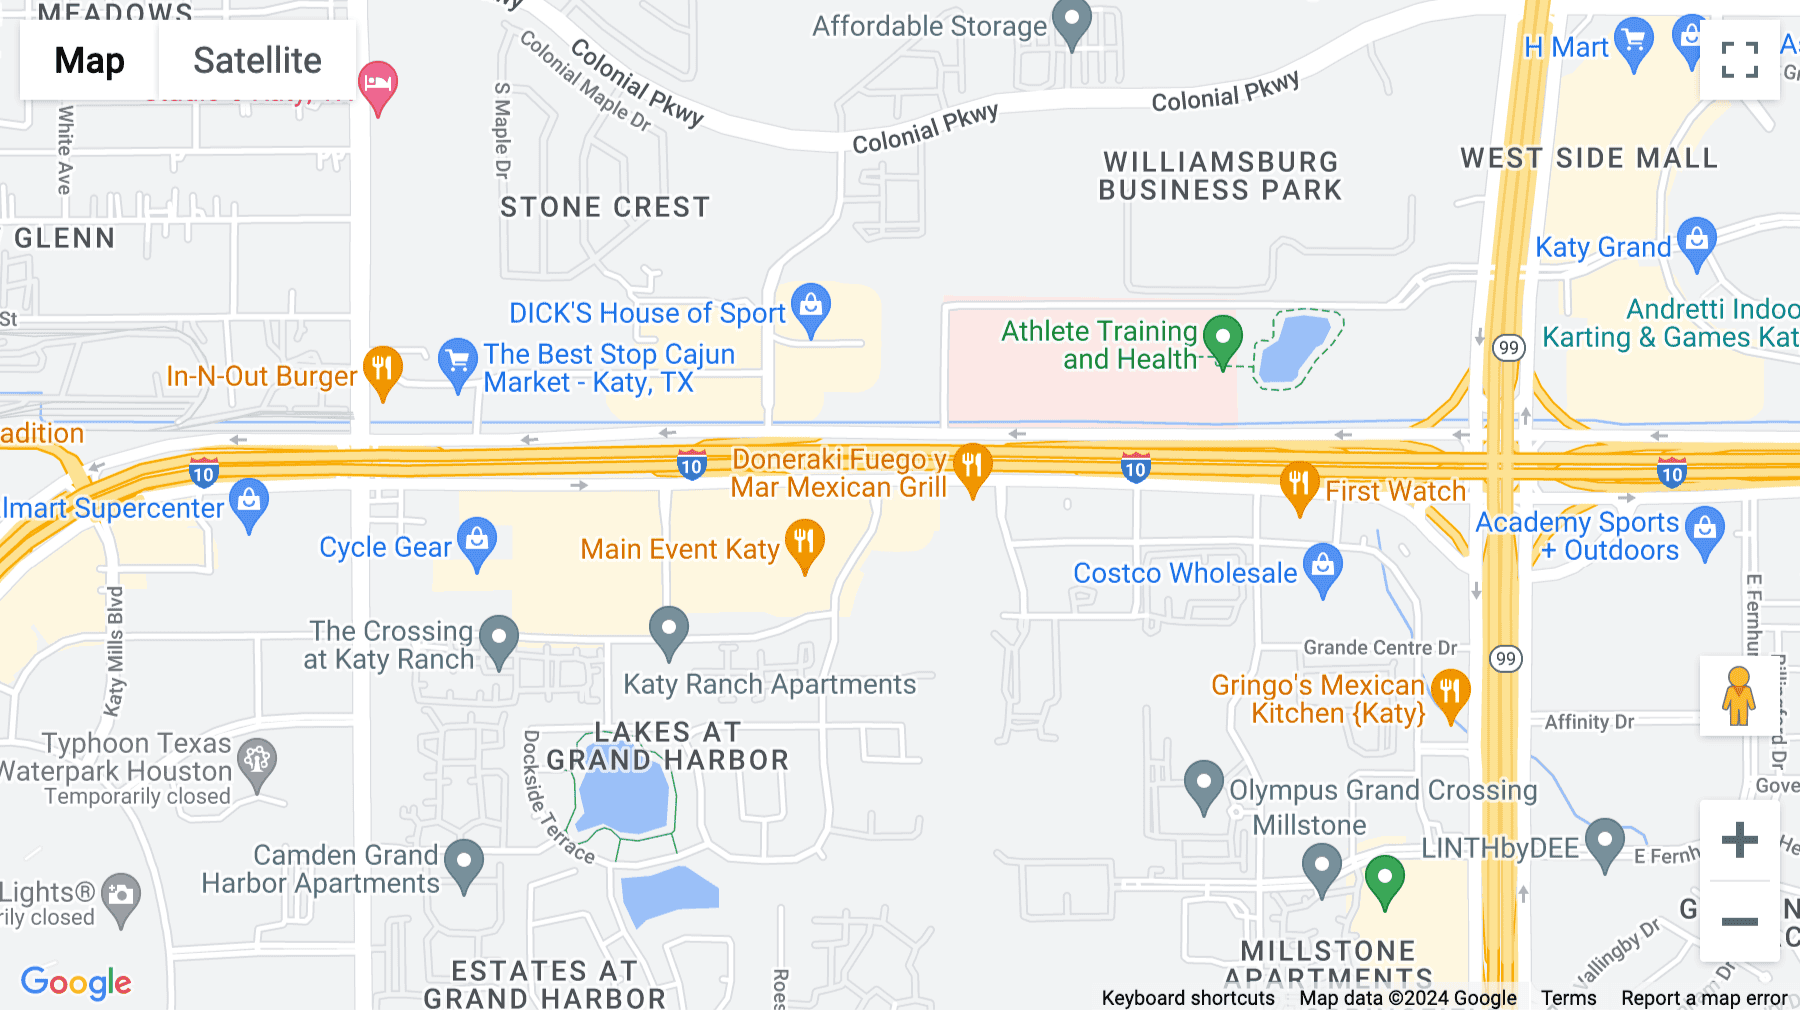 Click for interative map of 24285 Katy Freeway, Suite 300, Katy